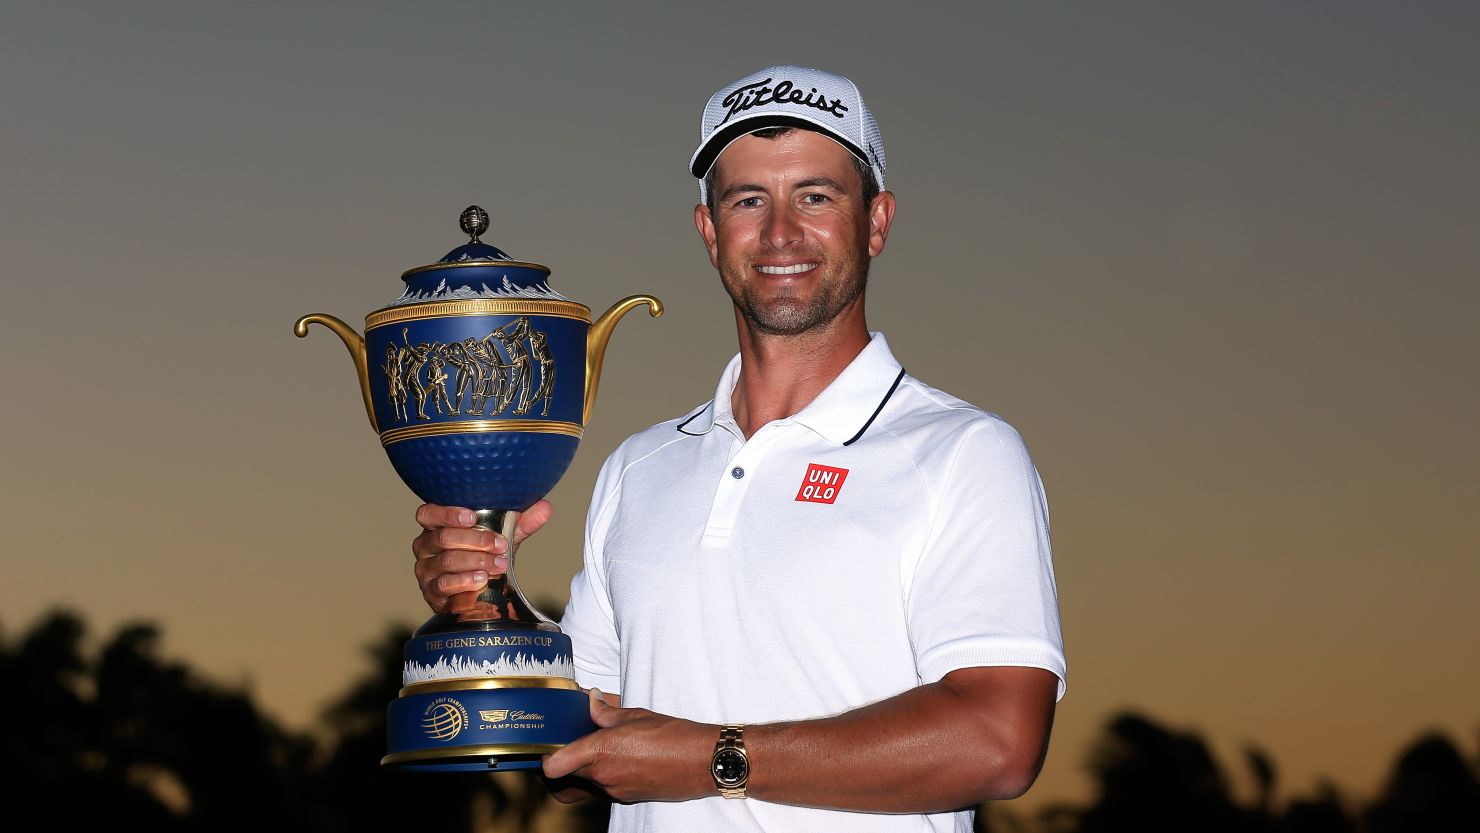 Adam Scott clinched his second PGA Tour title in two weeks with victory in the WGC Cadillac Championship